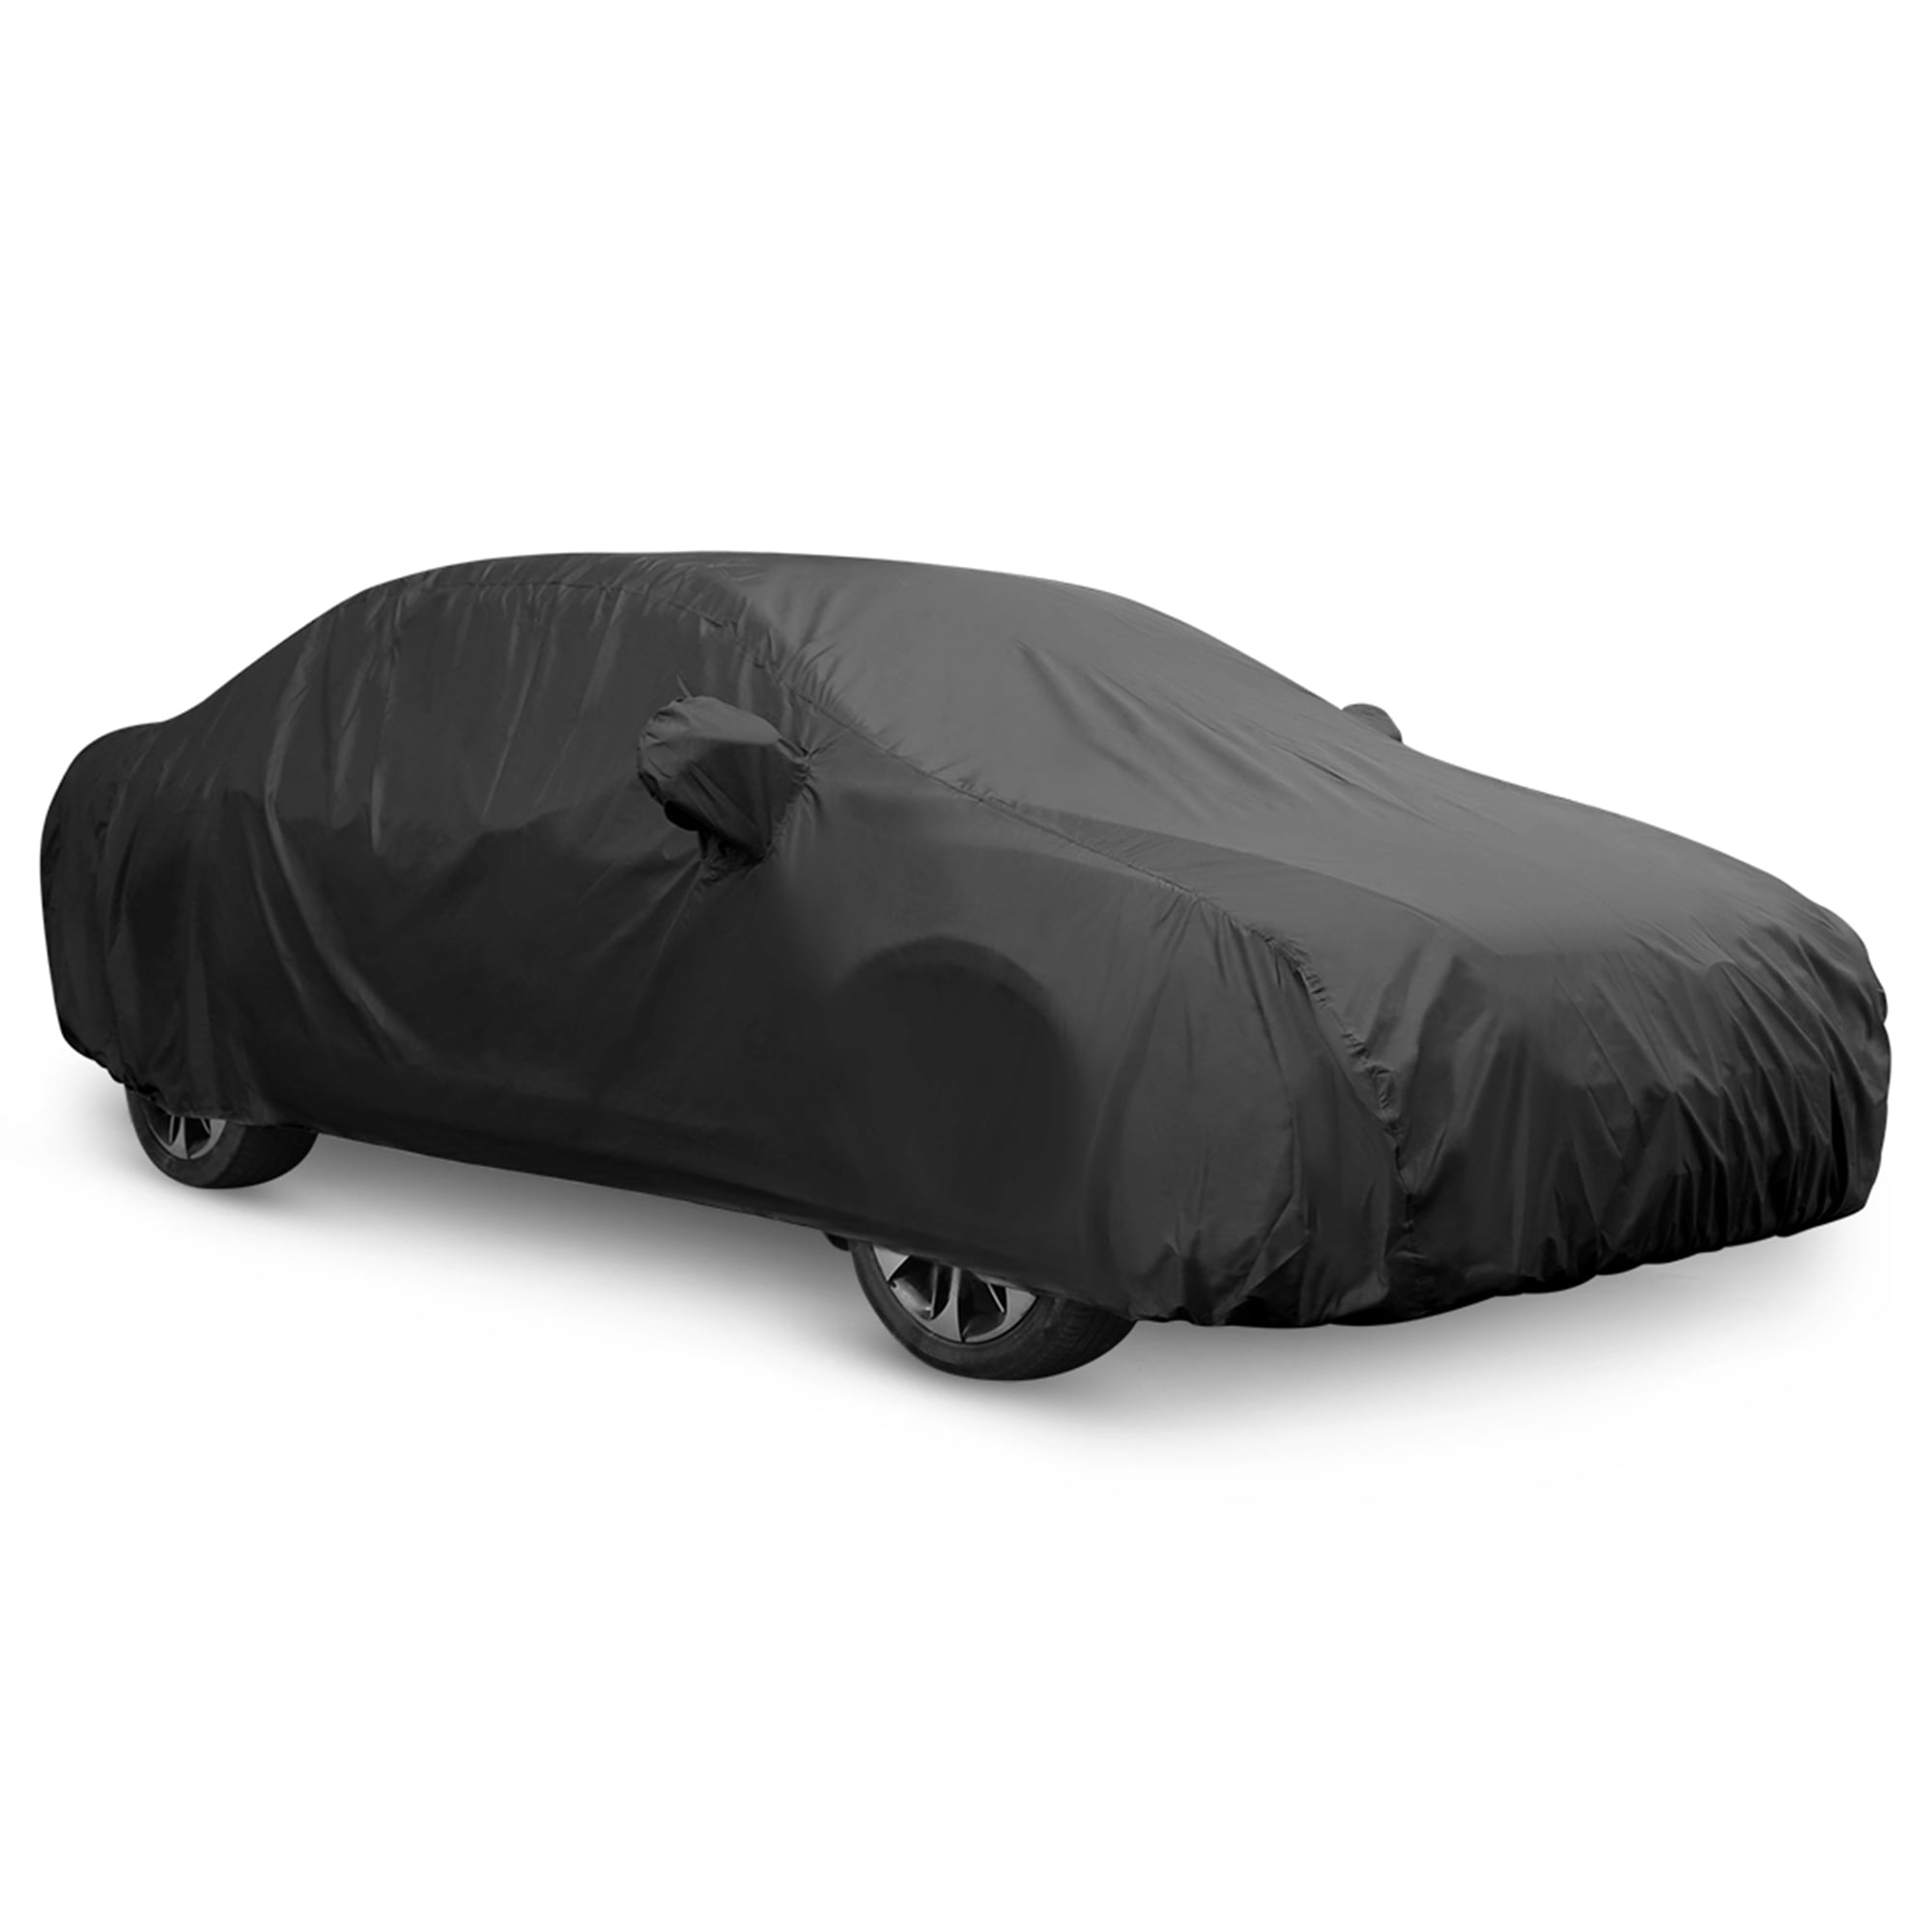 Chevrolet Tahoe 5 Layer Car Cover Fitted In Out Door Water Proof Rain Sun Dust 